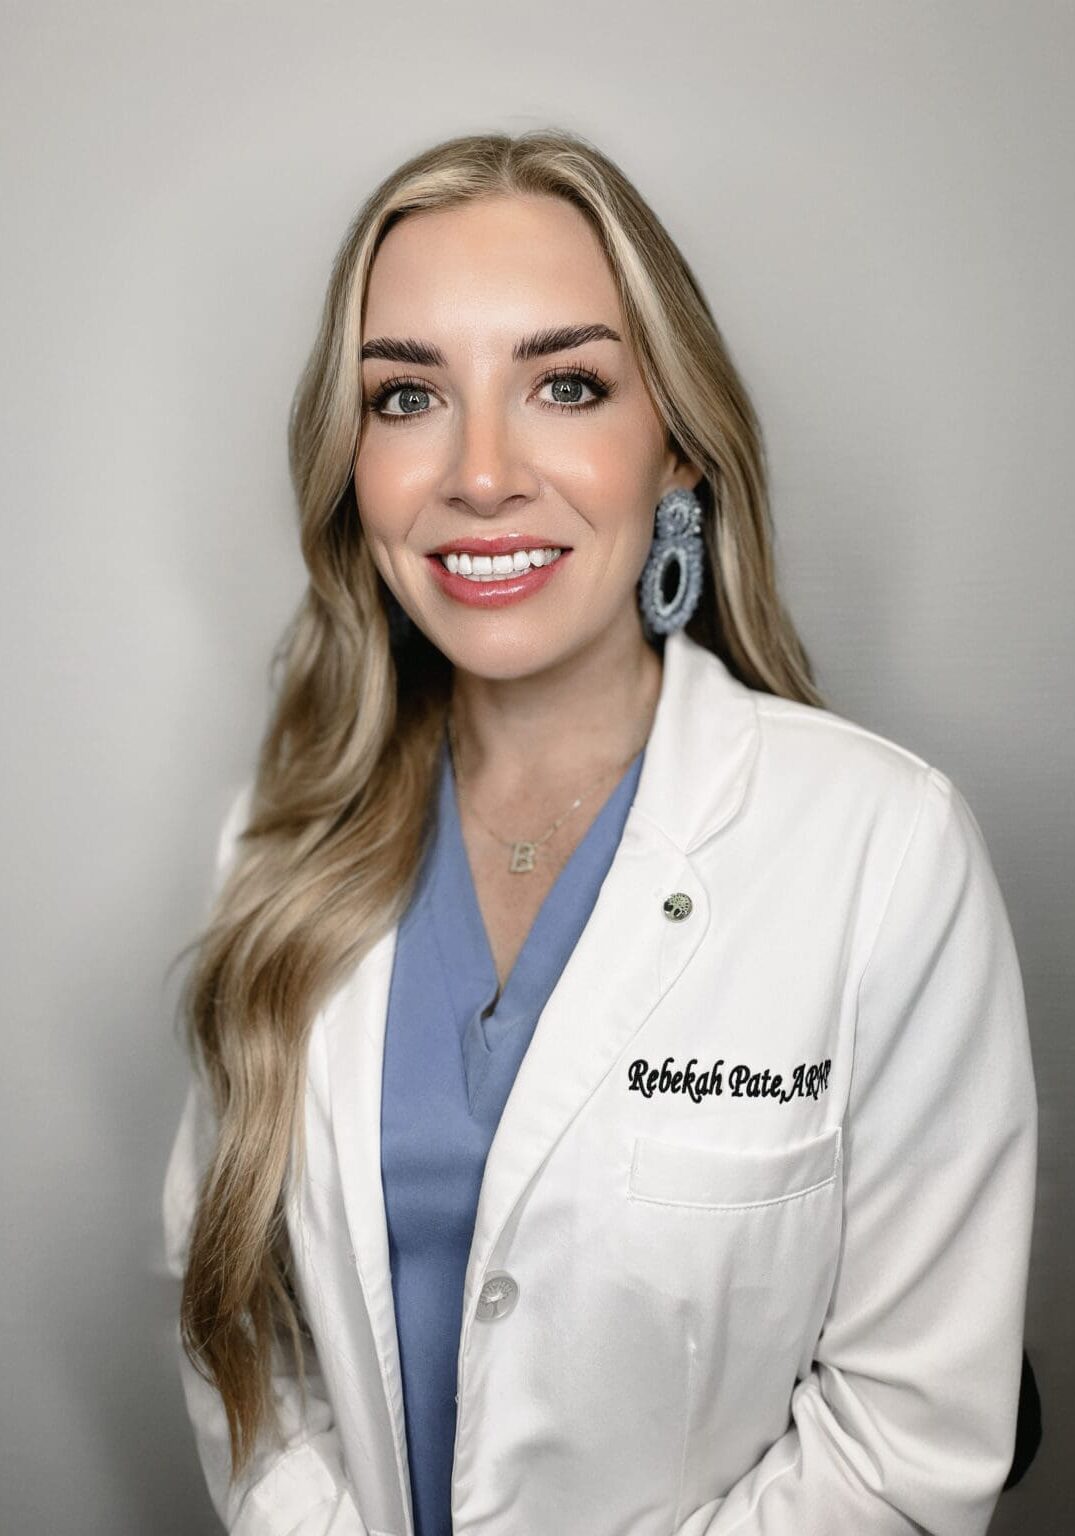 A woman in white lab coat and blue shirt.